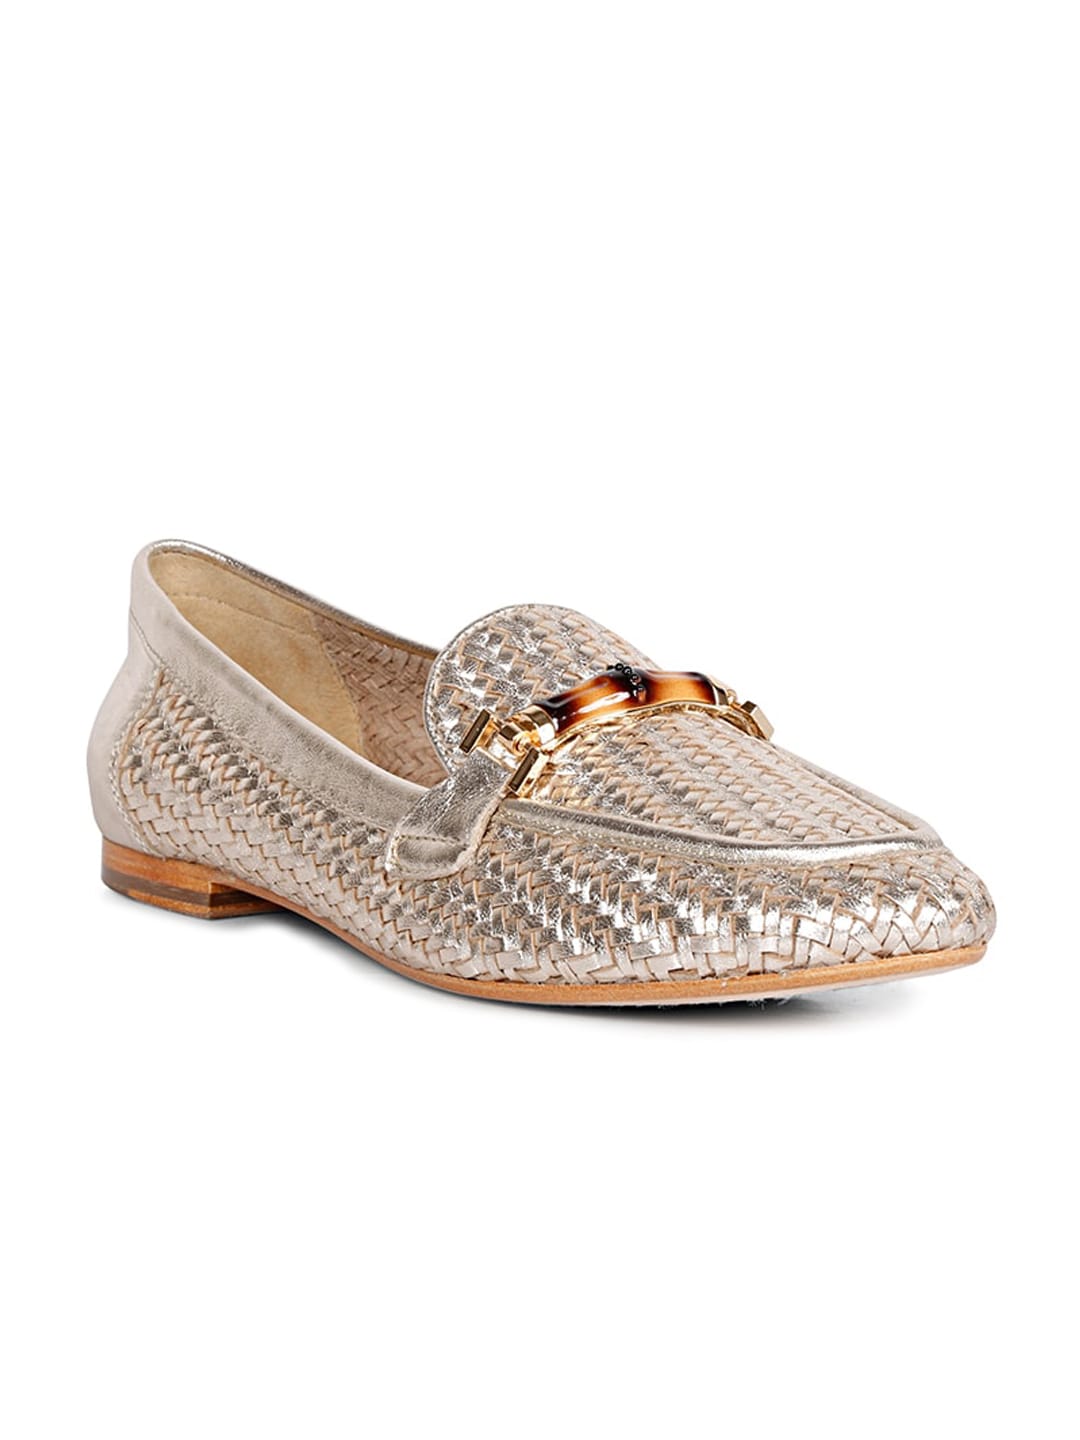 Saint G Women Woven Design Leather Horsebit Loafers Price in India